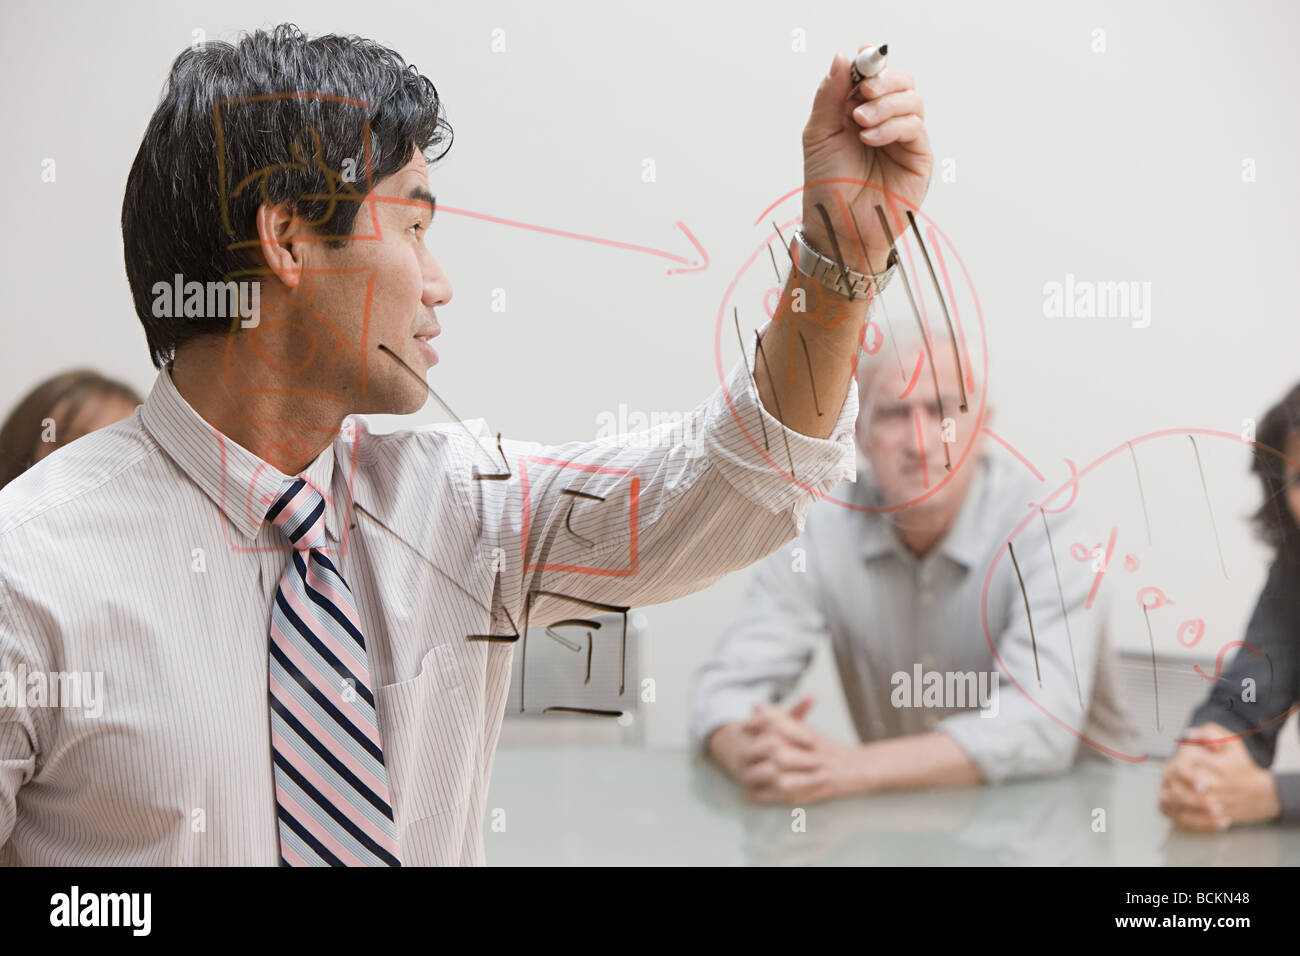 Man drawing diagram on glass Stock Photo